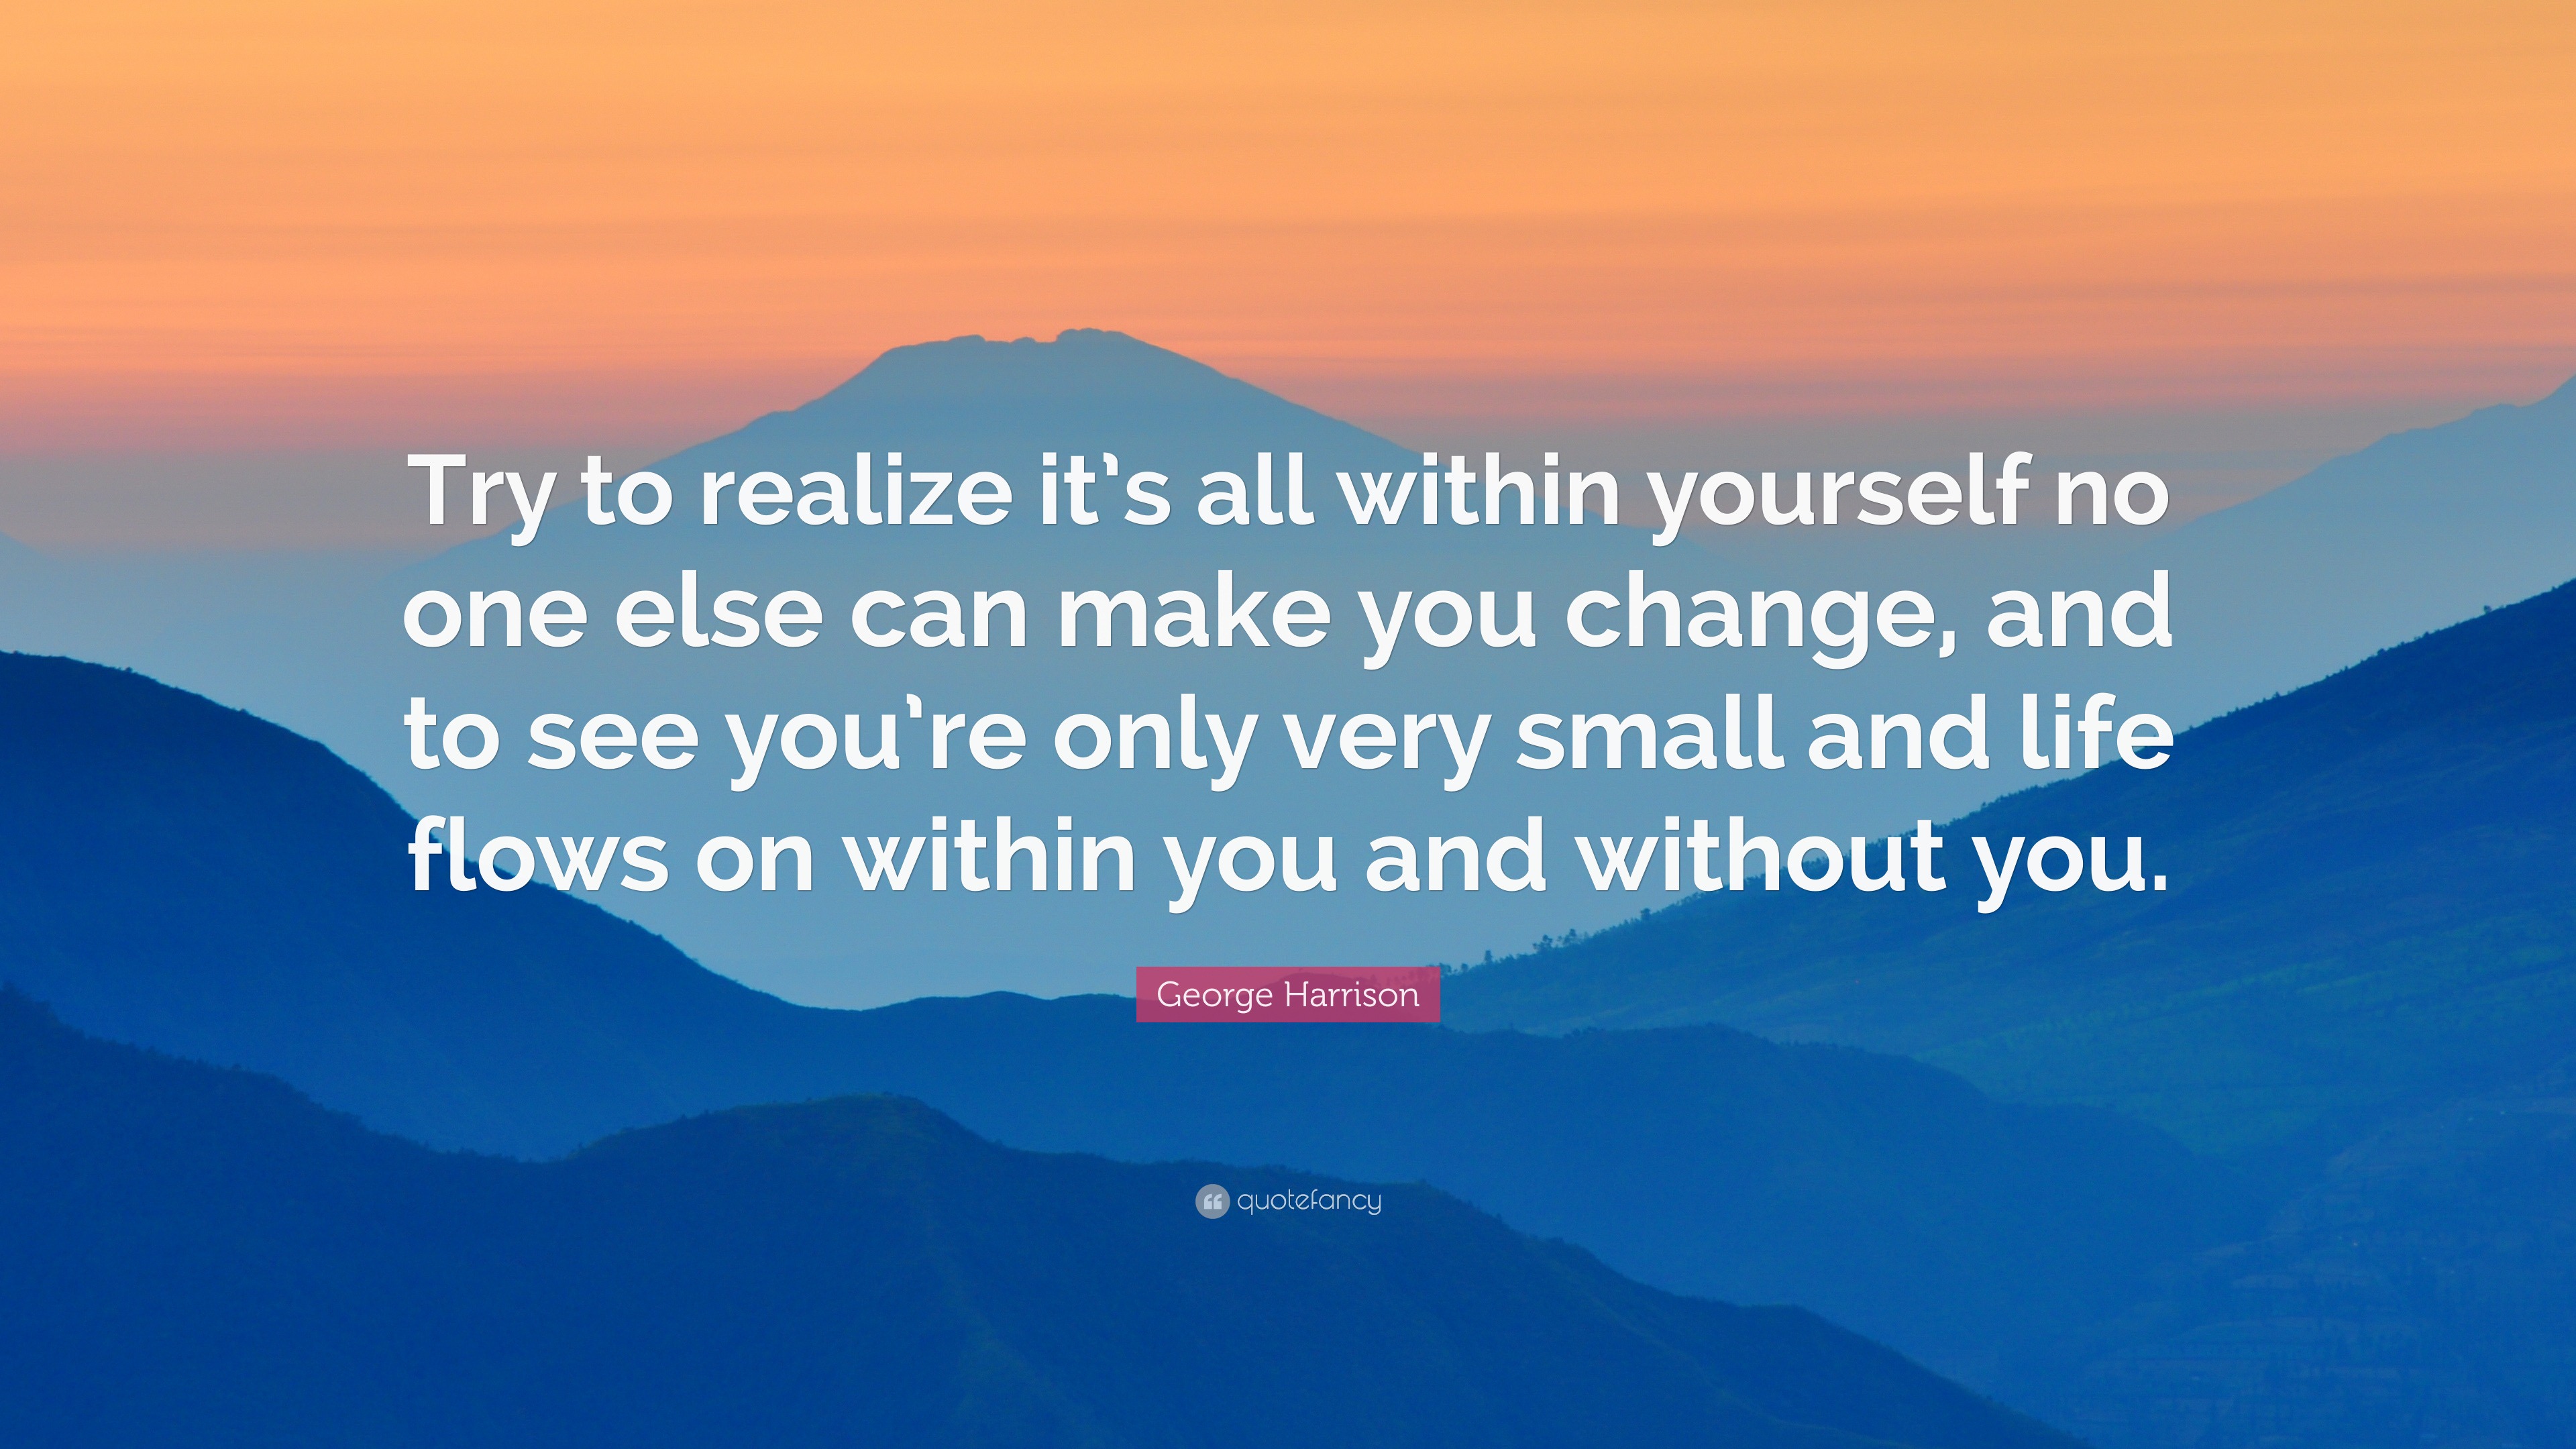 George Harrison Quote: "Try to realize it's all within ...